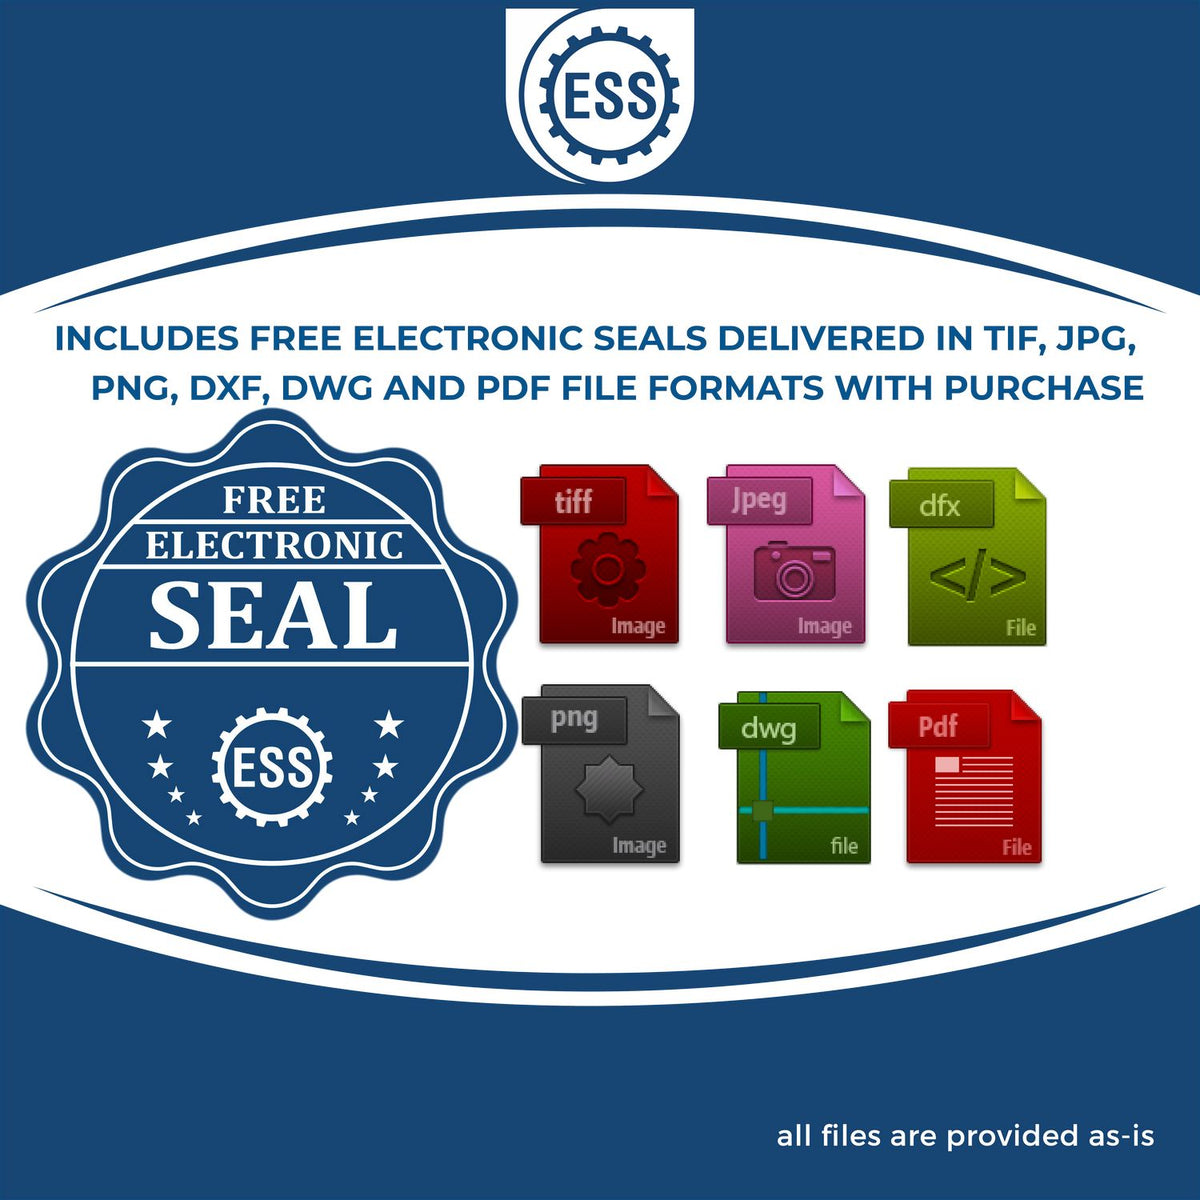 An infographic for the free electronic seal for the Heavy Duty Cast Iron Tennessee Geologist Seal Embosser illustrating the different file type icons such as DXF, DWG, TIF, JPG and PNG.